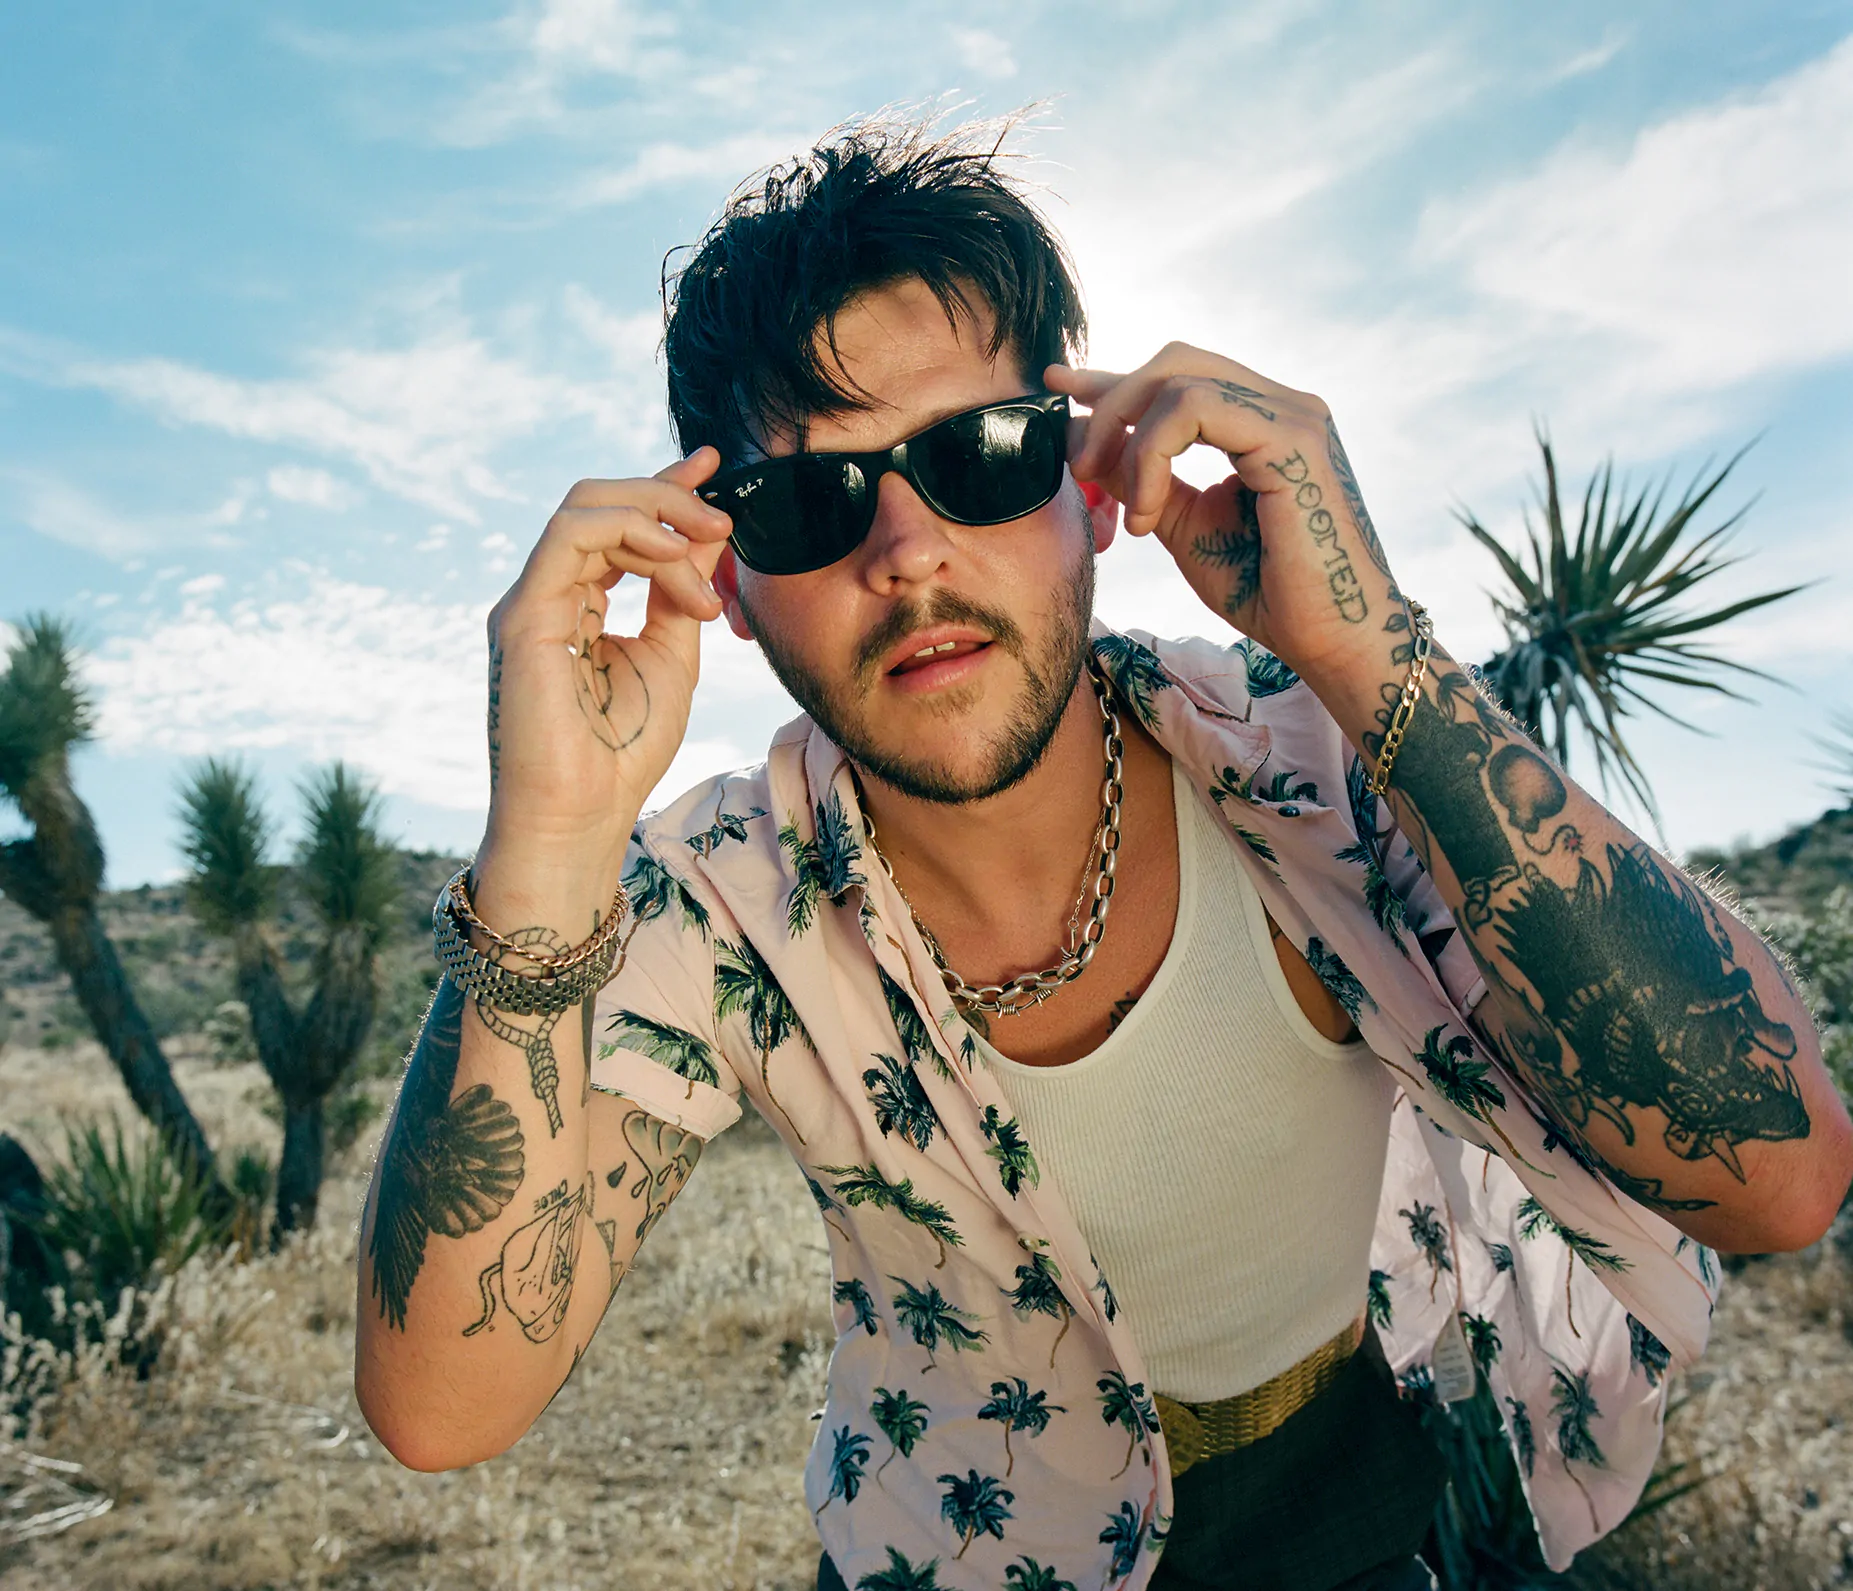 WAVVES announce new album, ‘Hideaway’ – out July 16th – Hear the first single ‘Help Is On The Way’